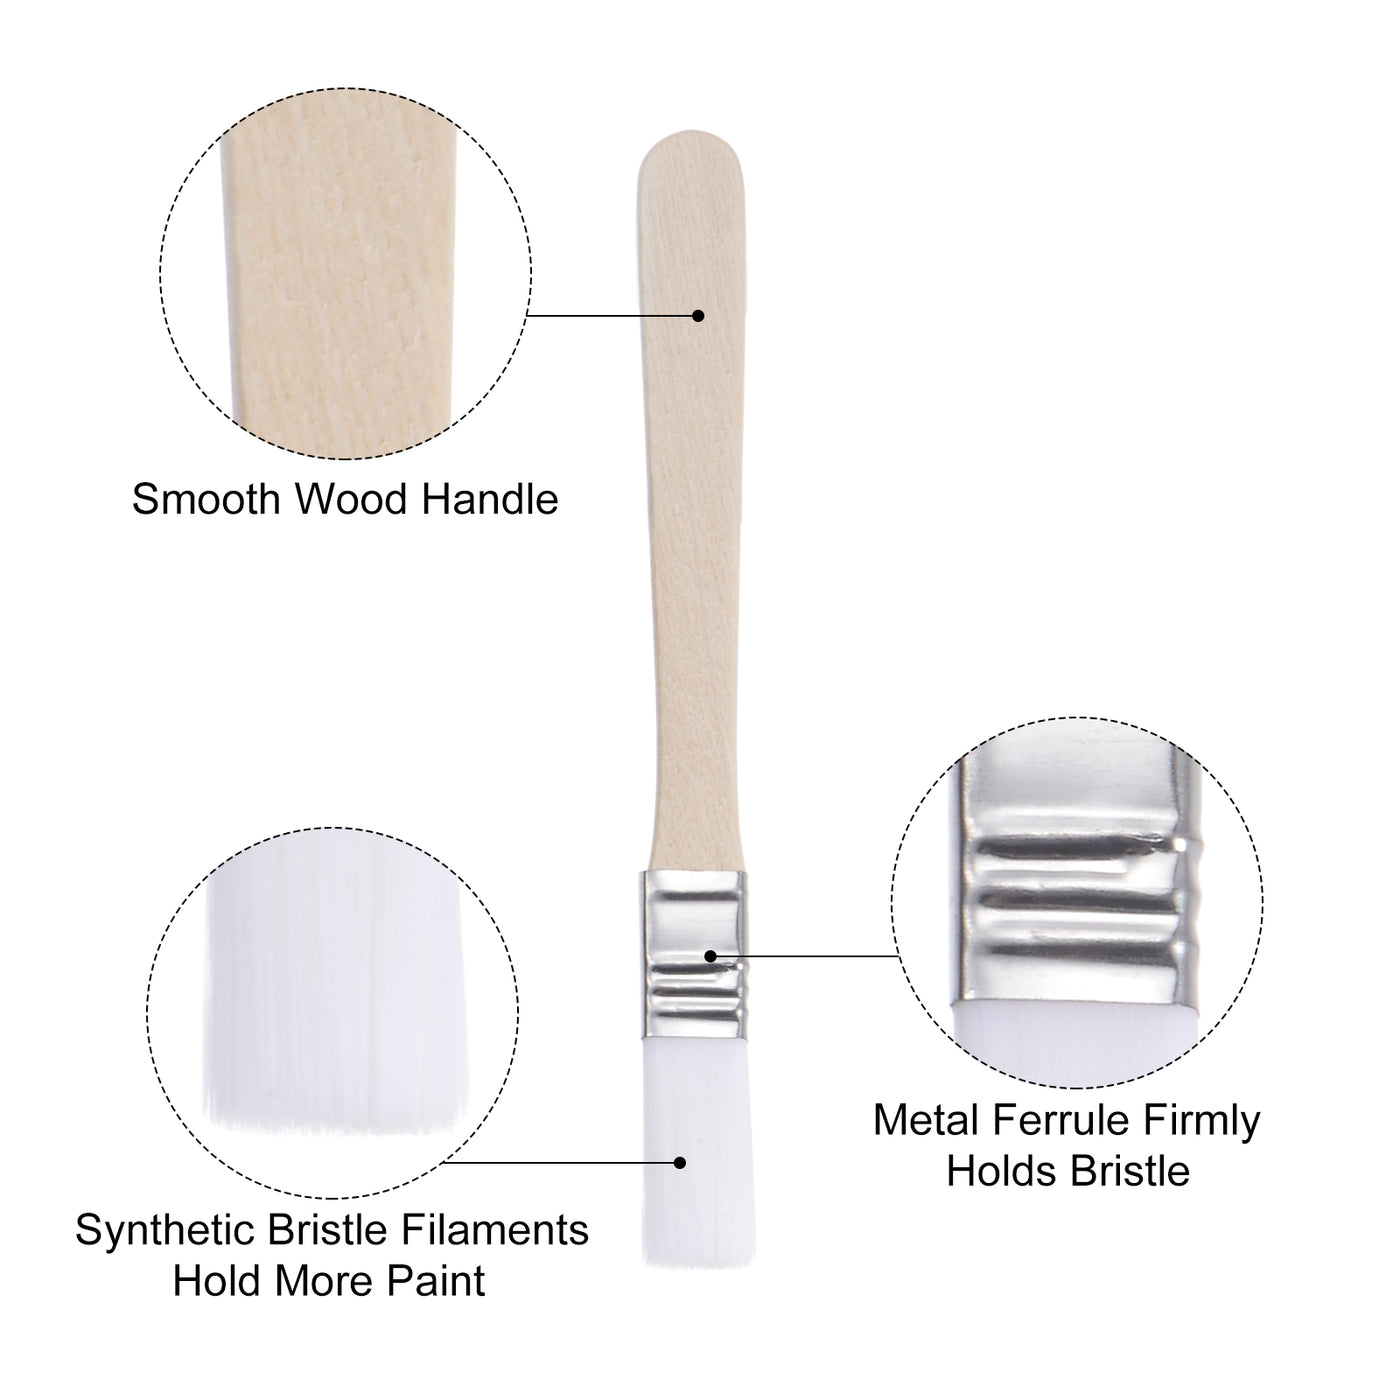 Uxcell Uxcell 0.6" Width Small Paint Brush Nylon Bristle with Wood Handle Tool, White 6Pcs